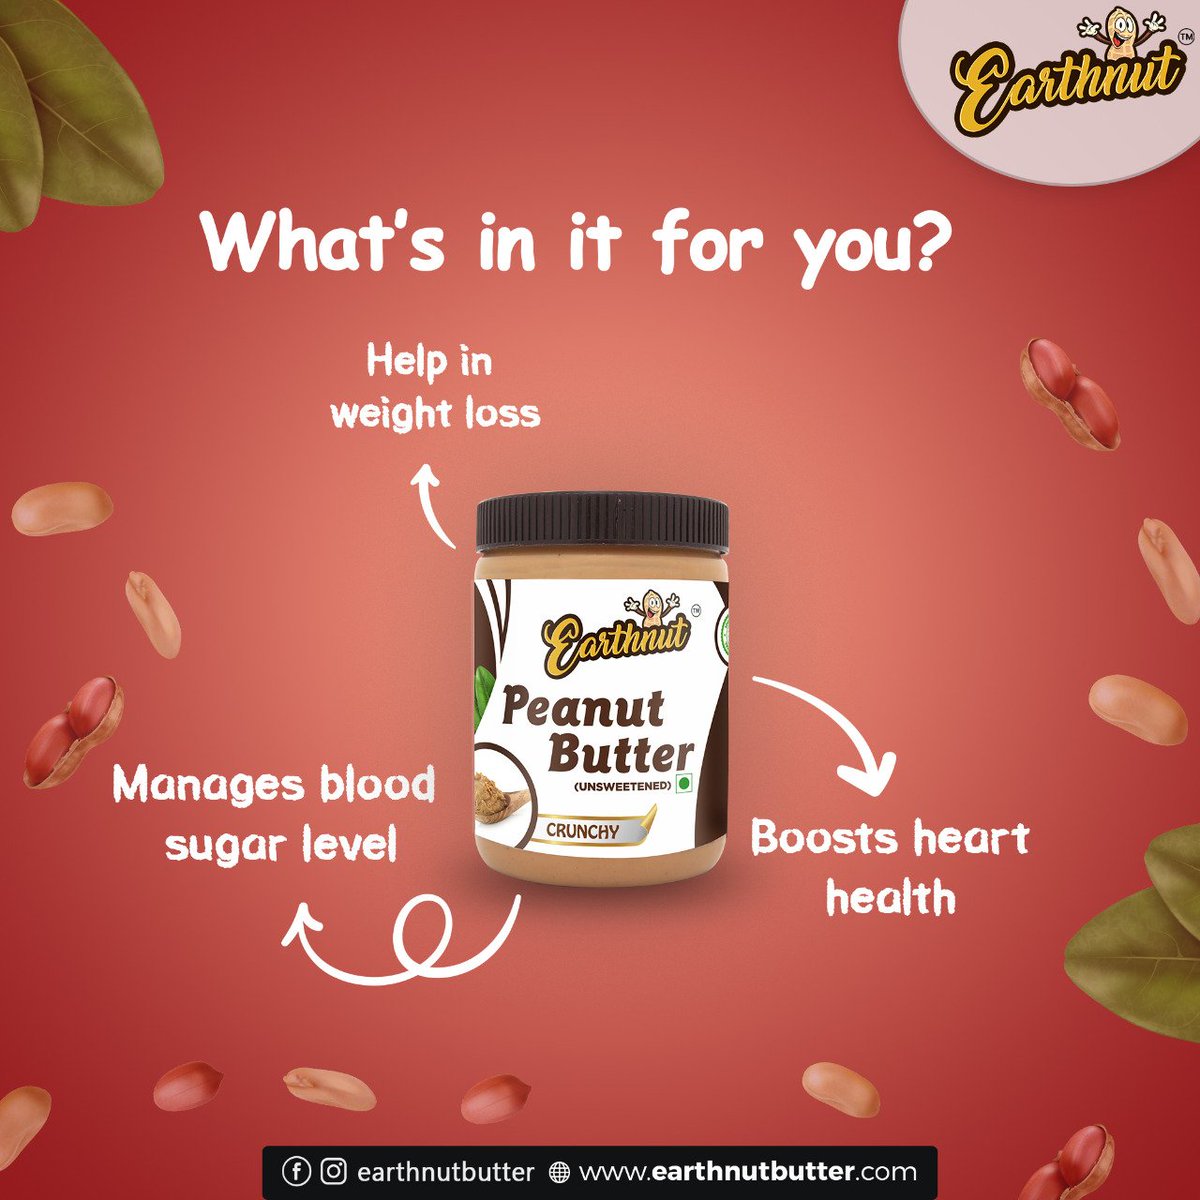 What's in it for you.....
#earthnut #naturalhair 
.
.
.
.
.
.
.
#weightloss #immunitysystem #boostyourimmunitysystem #fit 
#madeinindia #lifestyle #staystrong #instadaily #livelong #healthy #peanuts #peanutbutteraddict #naturaldiet #photooftheday #fitness #motivation